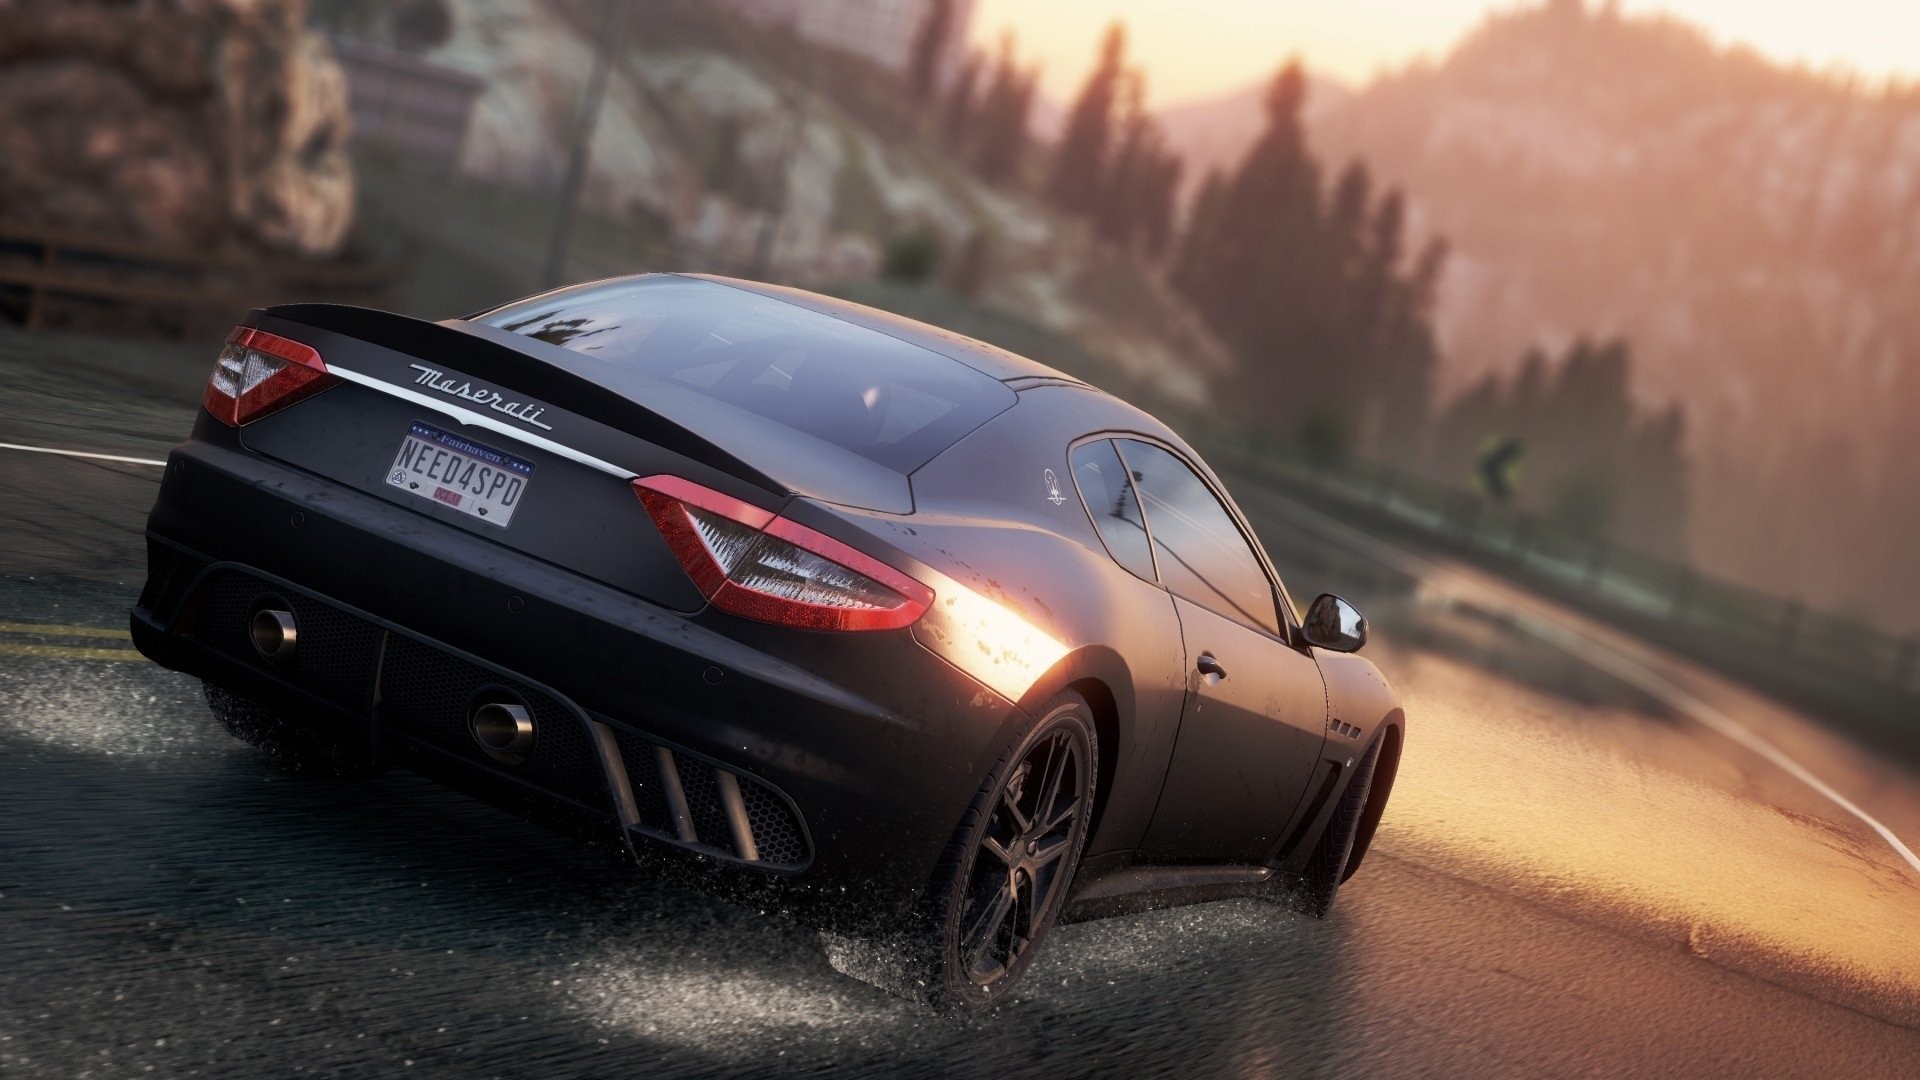 1920x1080 Computerspiele - Need For Speed: Most Wanted (2012) Need For Speed Maserati  Fahrzeug